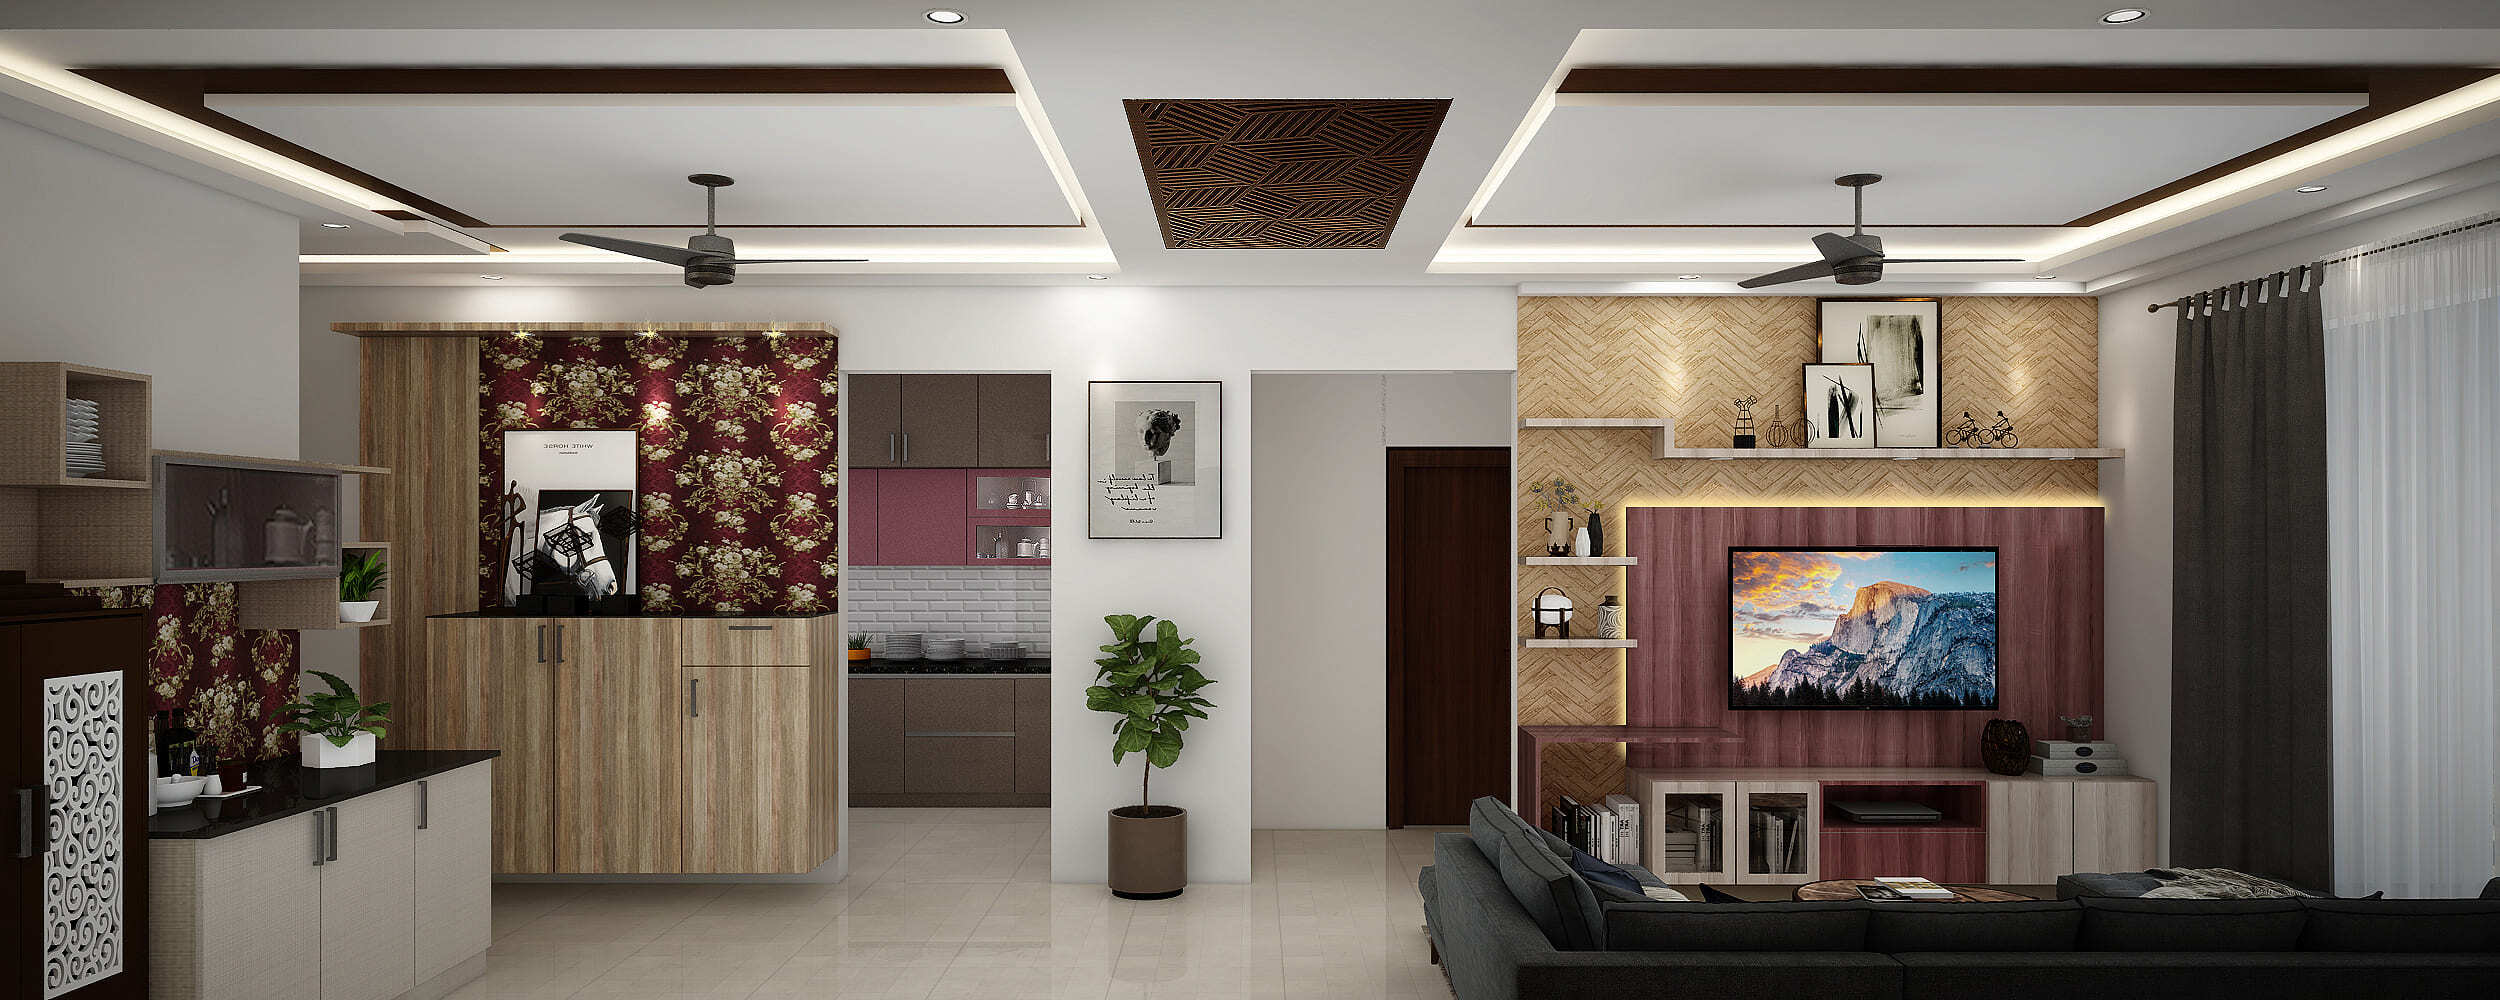 Simple and Efficient Bangalore Home Interiors for a Working Couple